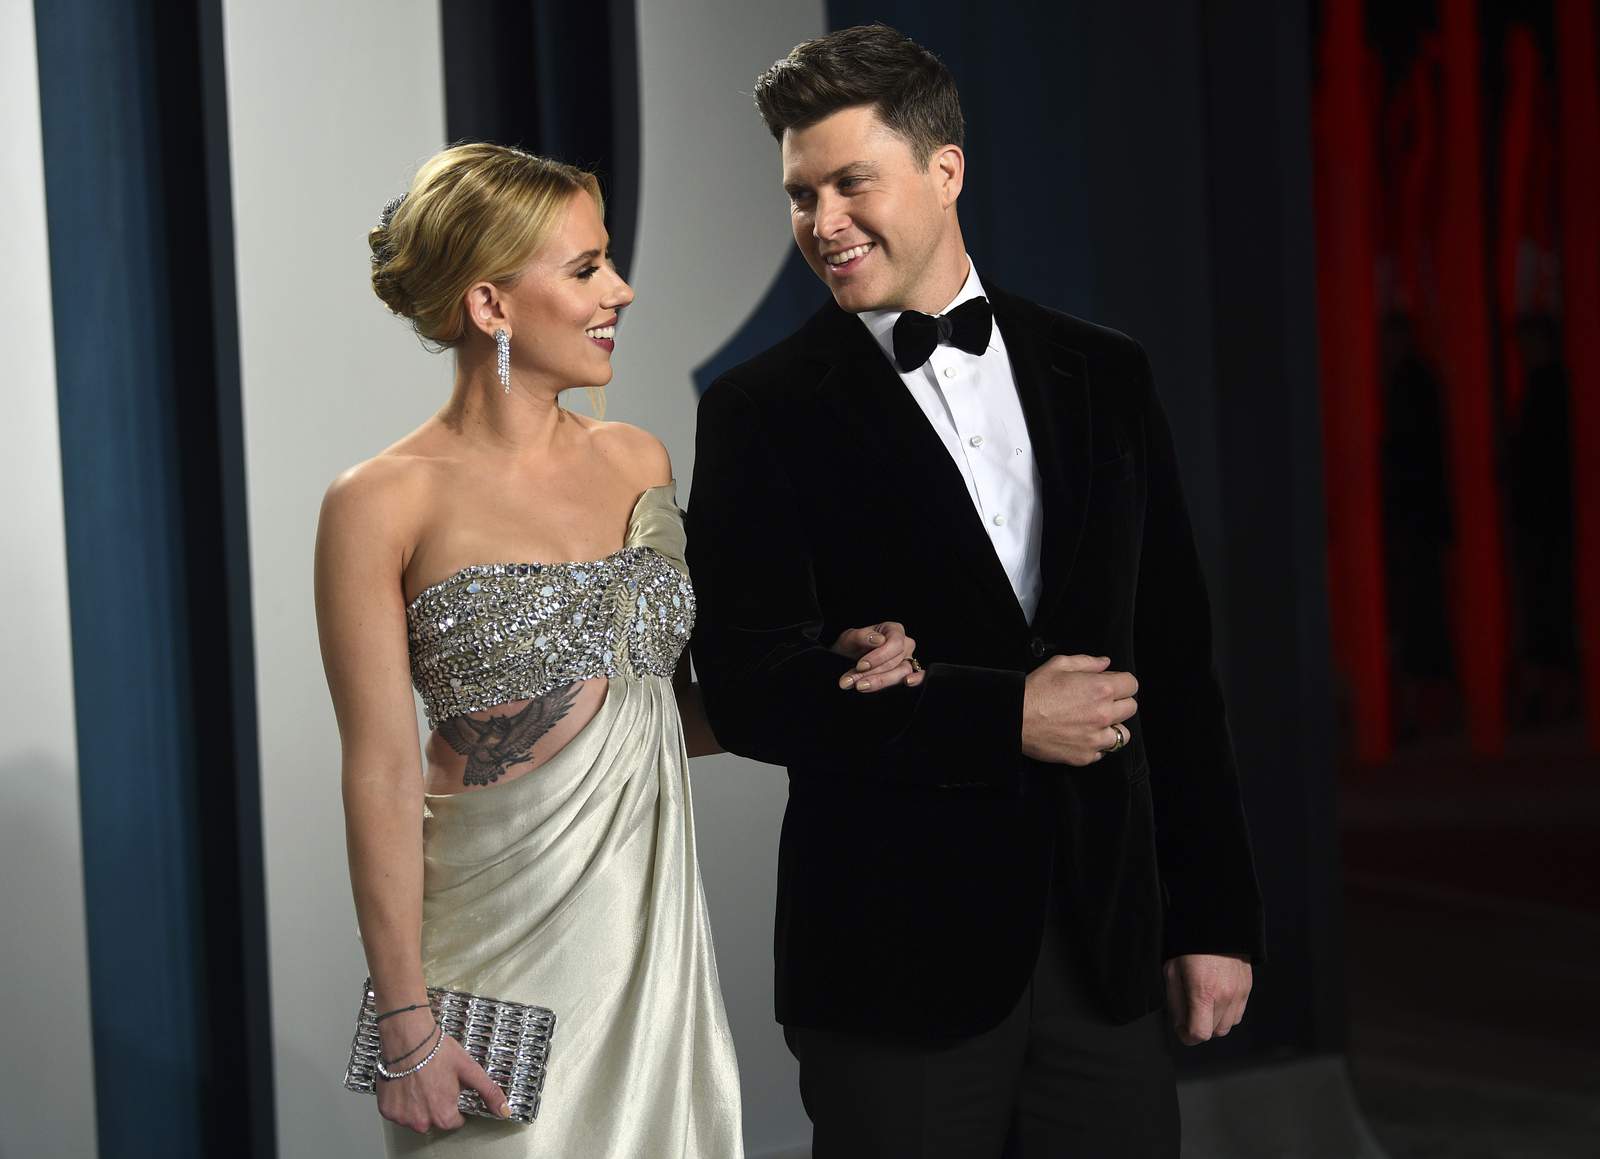 Colin Jost opens up about reasons behind his marriage reveal